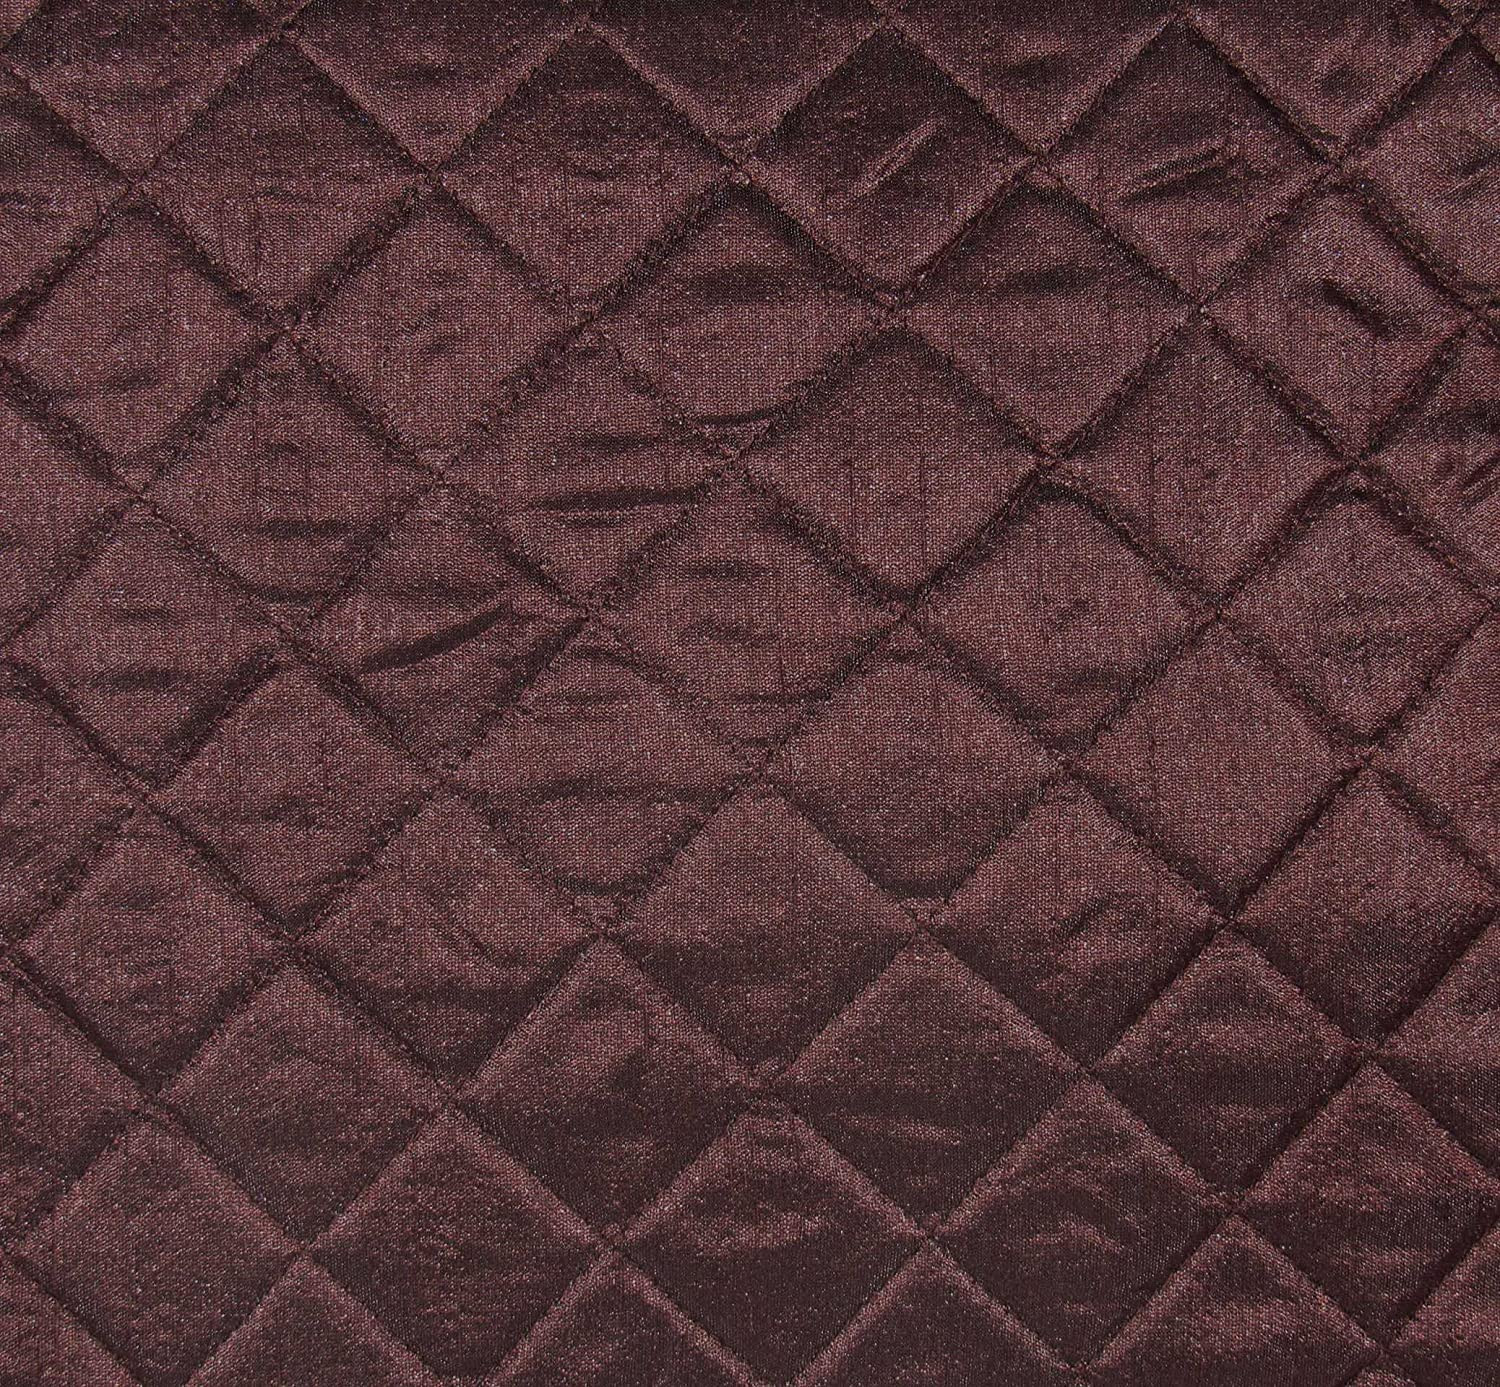 Kuber Industries Quilted Pillow Covers, 18 x 28 inch,(Maroon & Cream)-HS_38_KUBMART21773